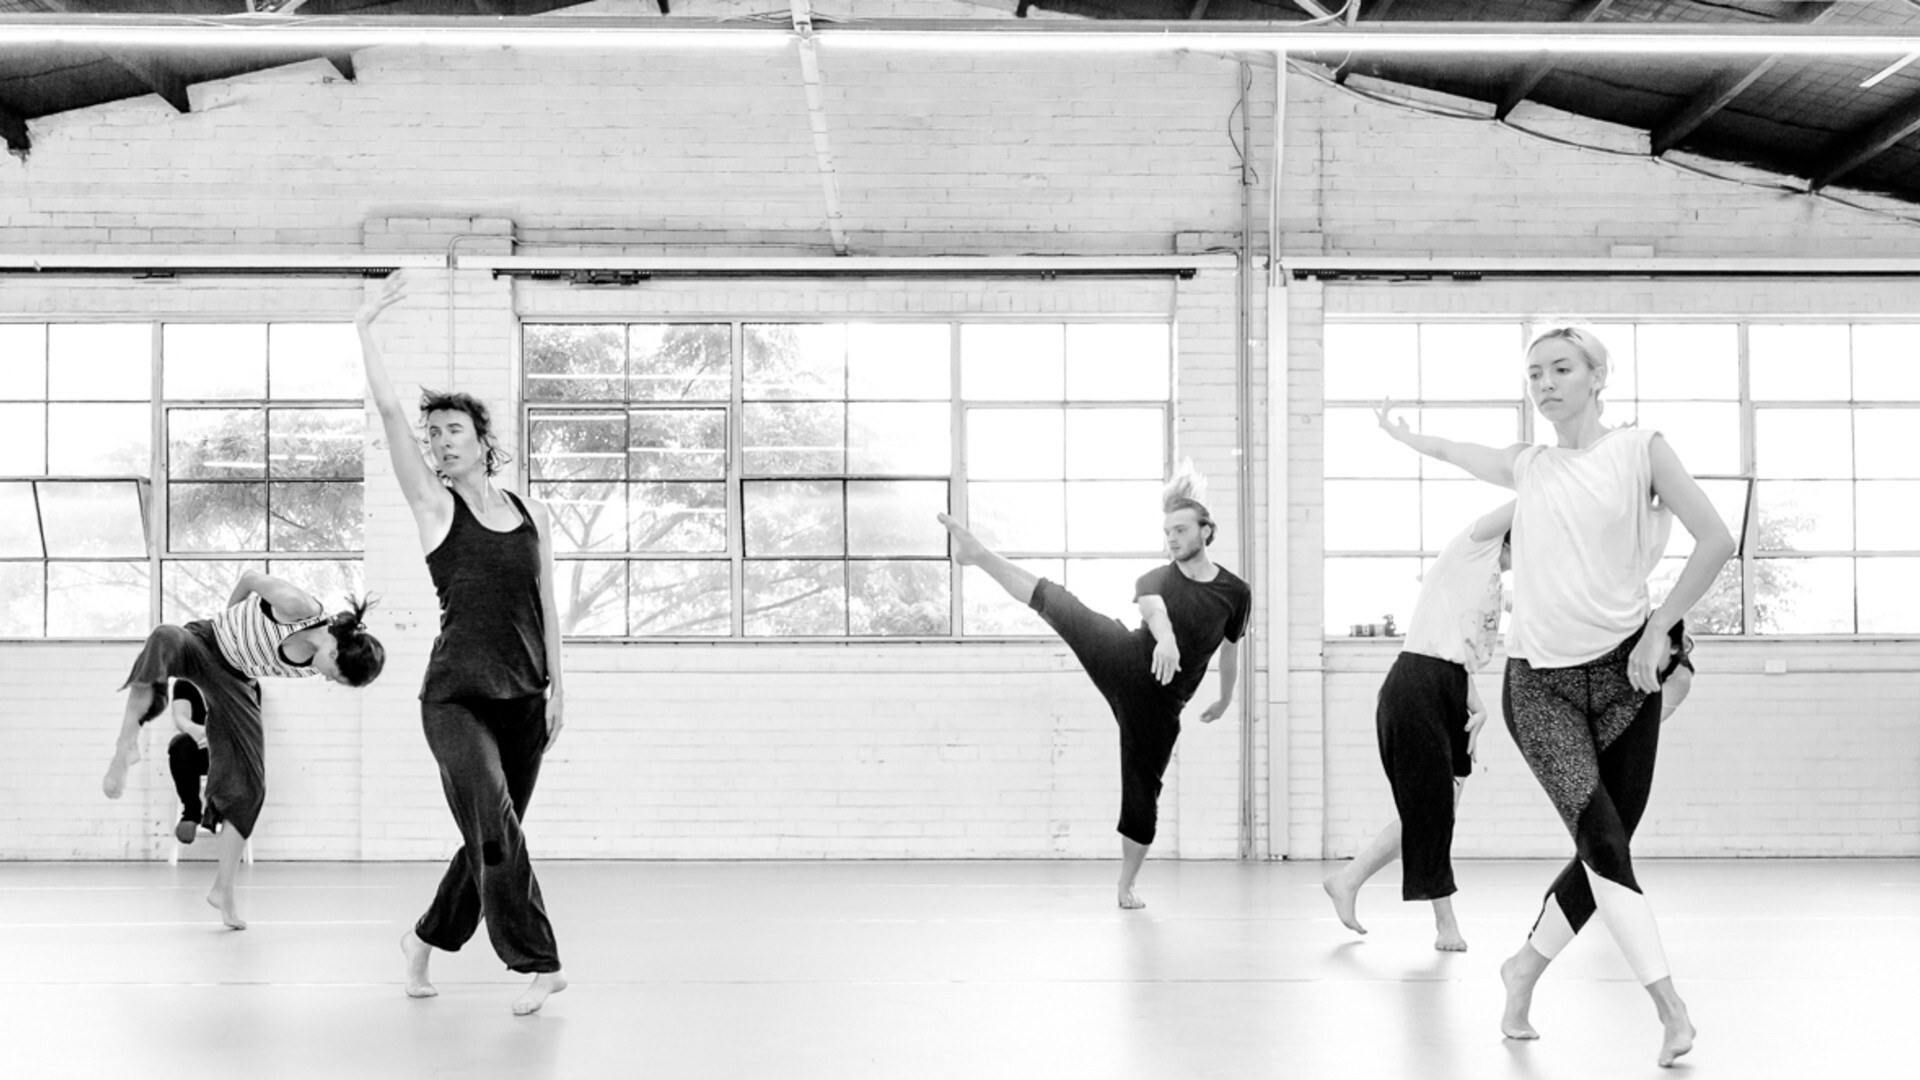 A group of dancers rehearsing in brightly lit studios—each improvising their own movement.